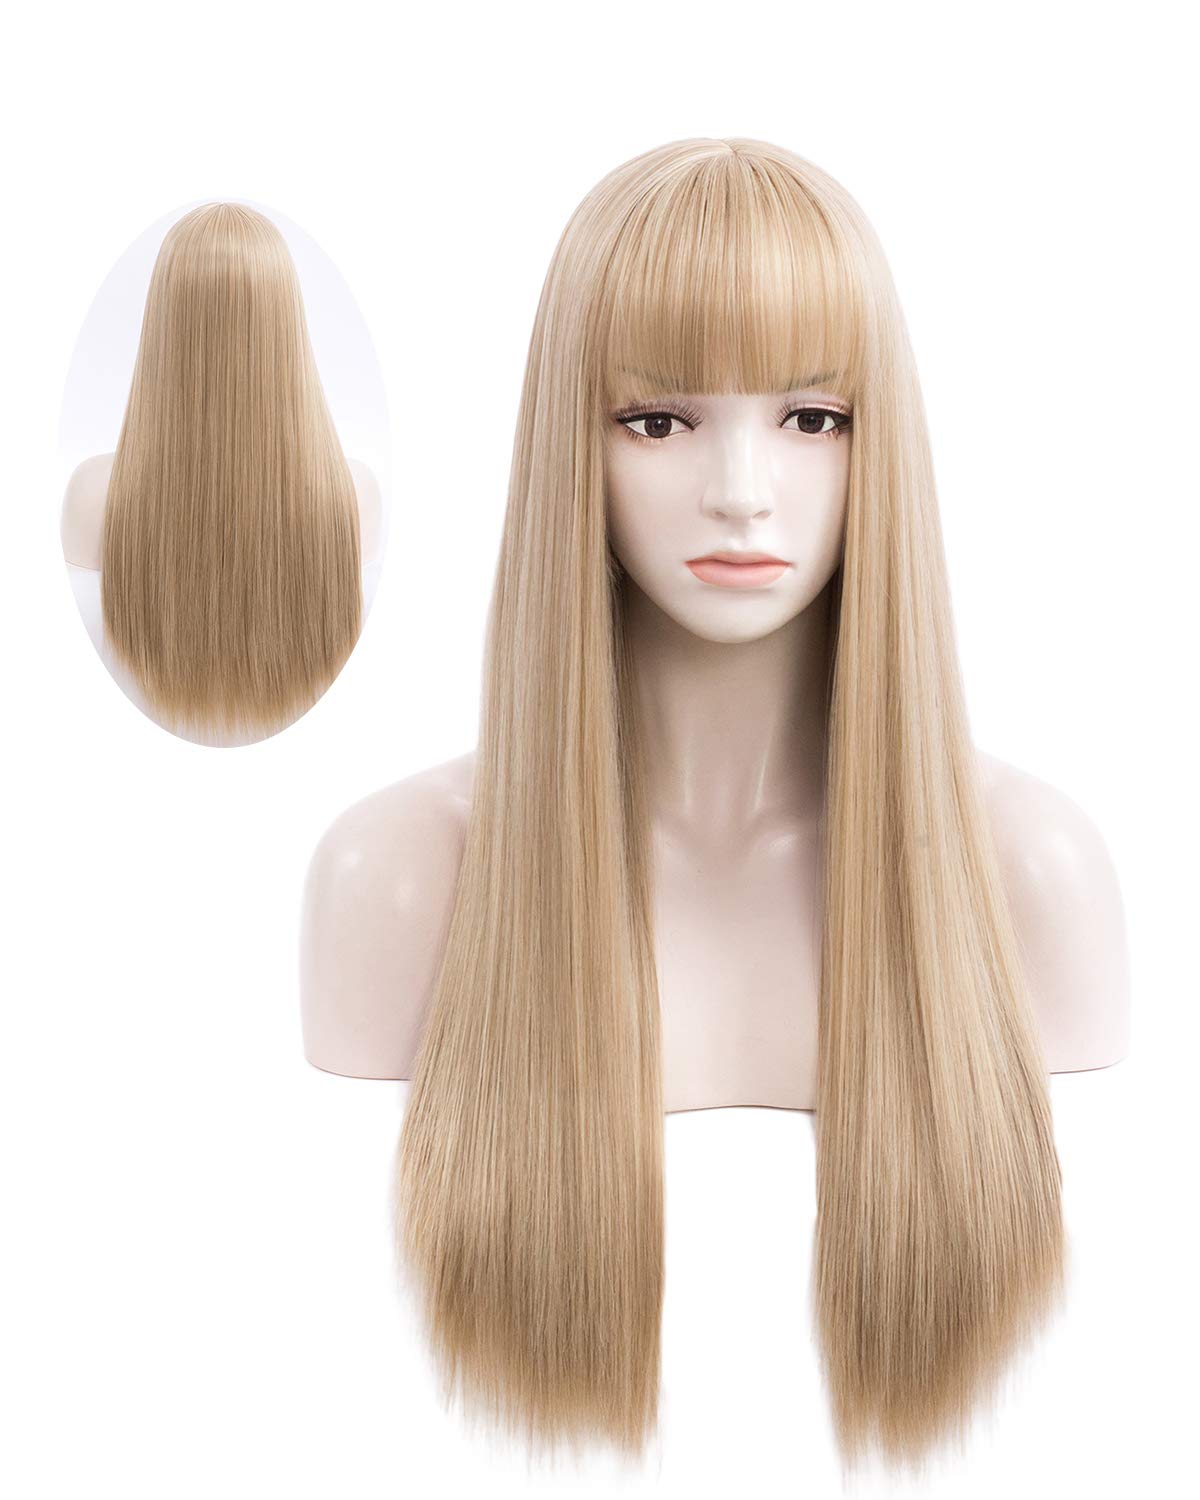 Price:$17.49    netgo Women's Long Straight Wigs With Bangs, 27 inch Heat Resistant Synthetic Cosplay Party Halloween Costume Wigs with Rose Net (Ash Blonde)  Beauty